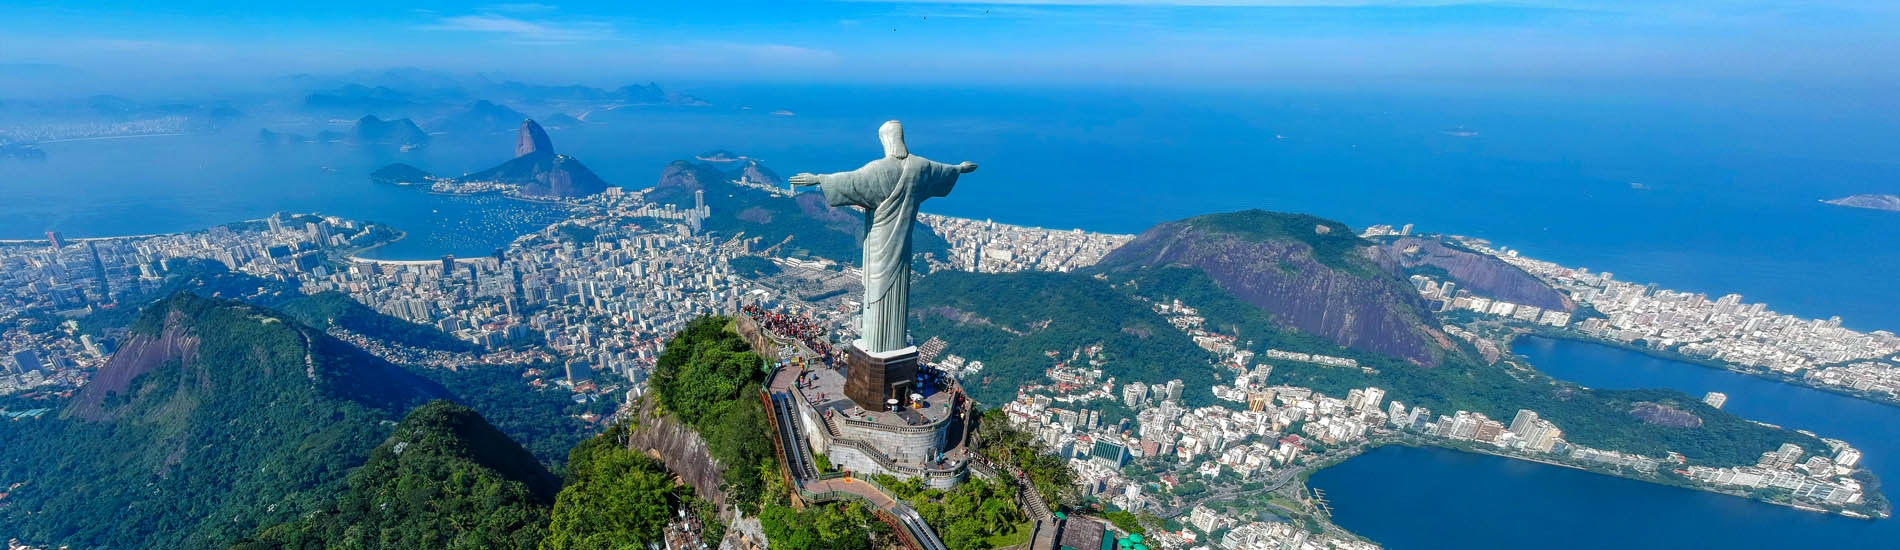 One of the Seven Wonders of the World the magnificent Christ the Redeemer